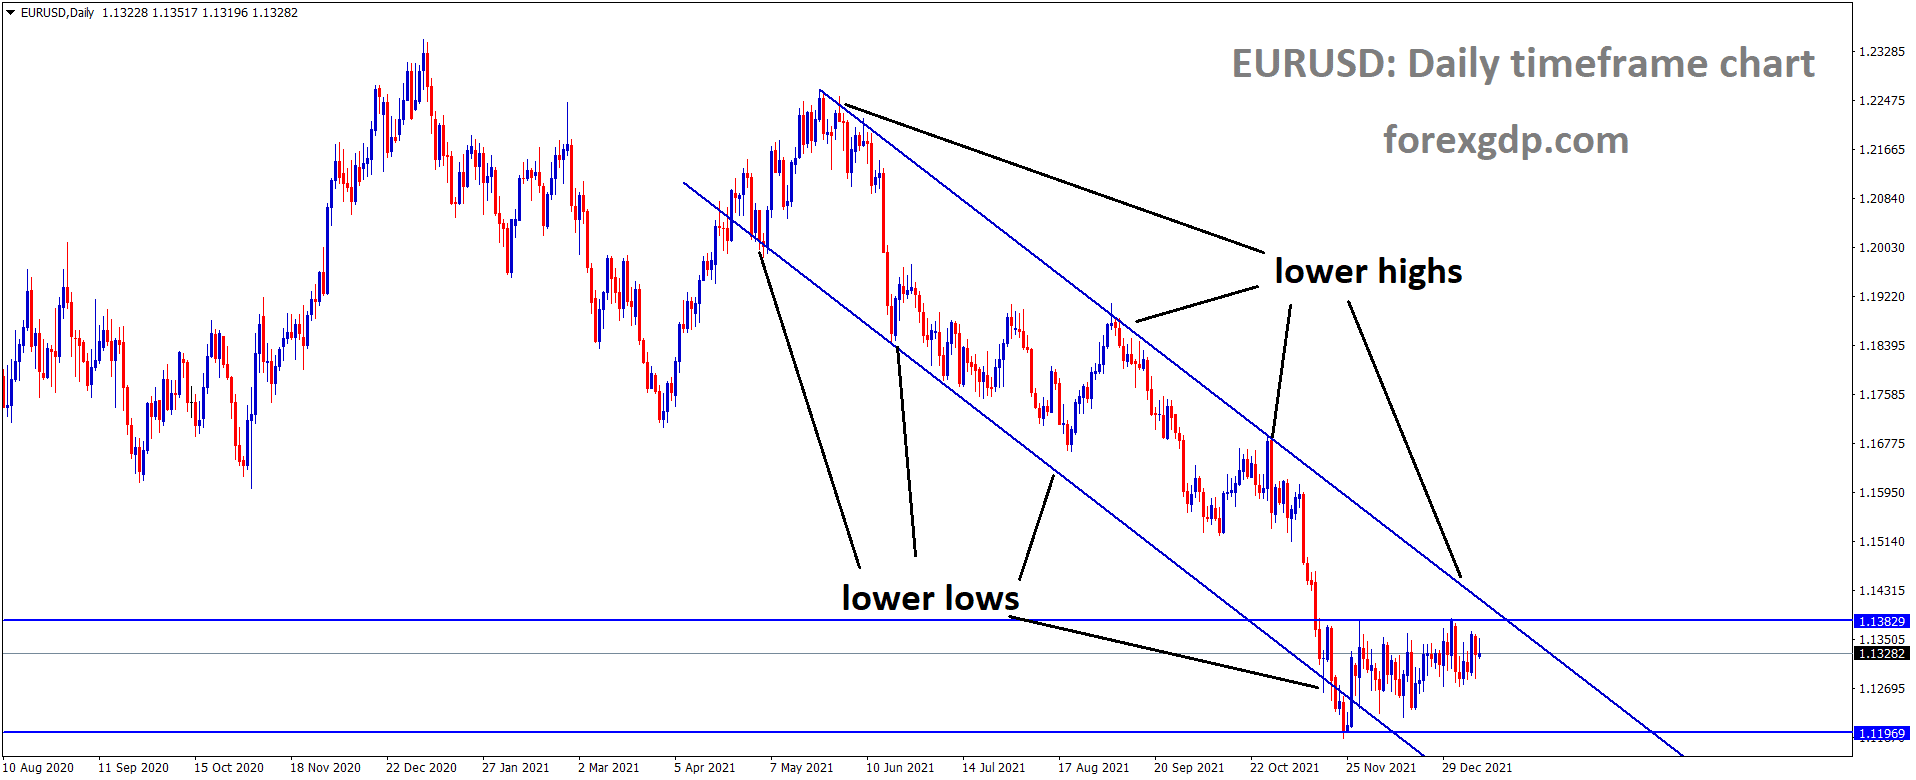 EURUSD is moving in the Descending channel and the market has consolidated in the lower high area.